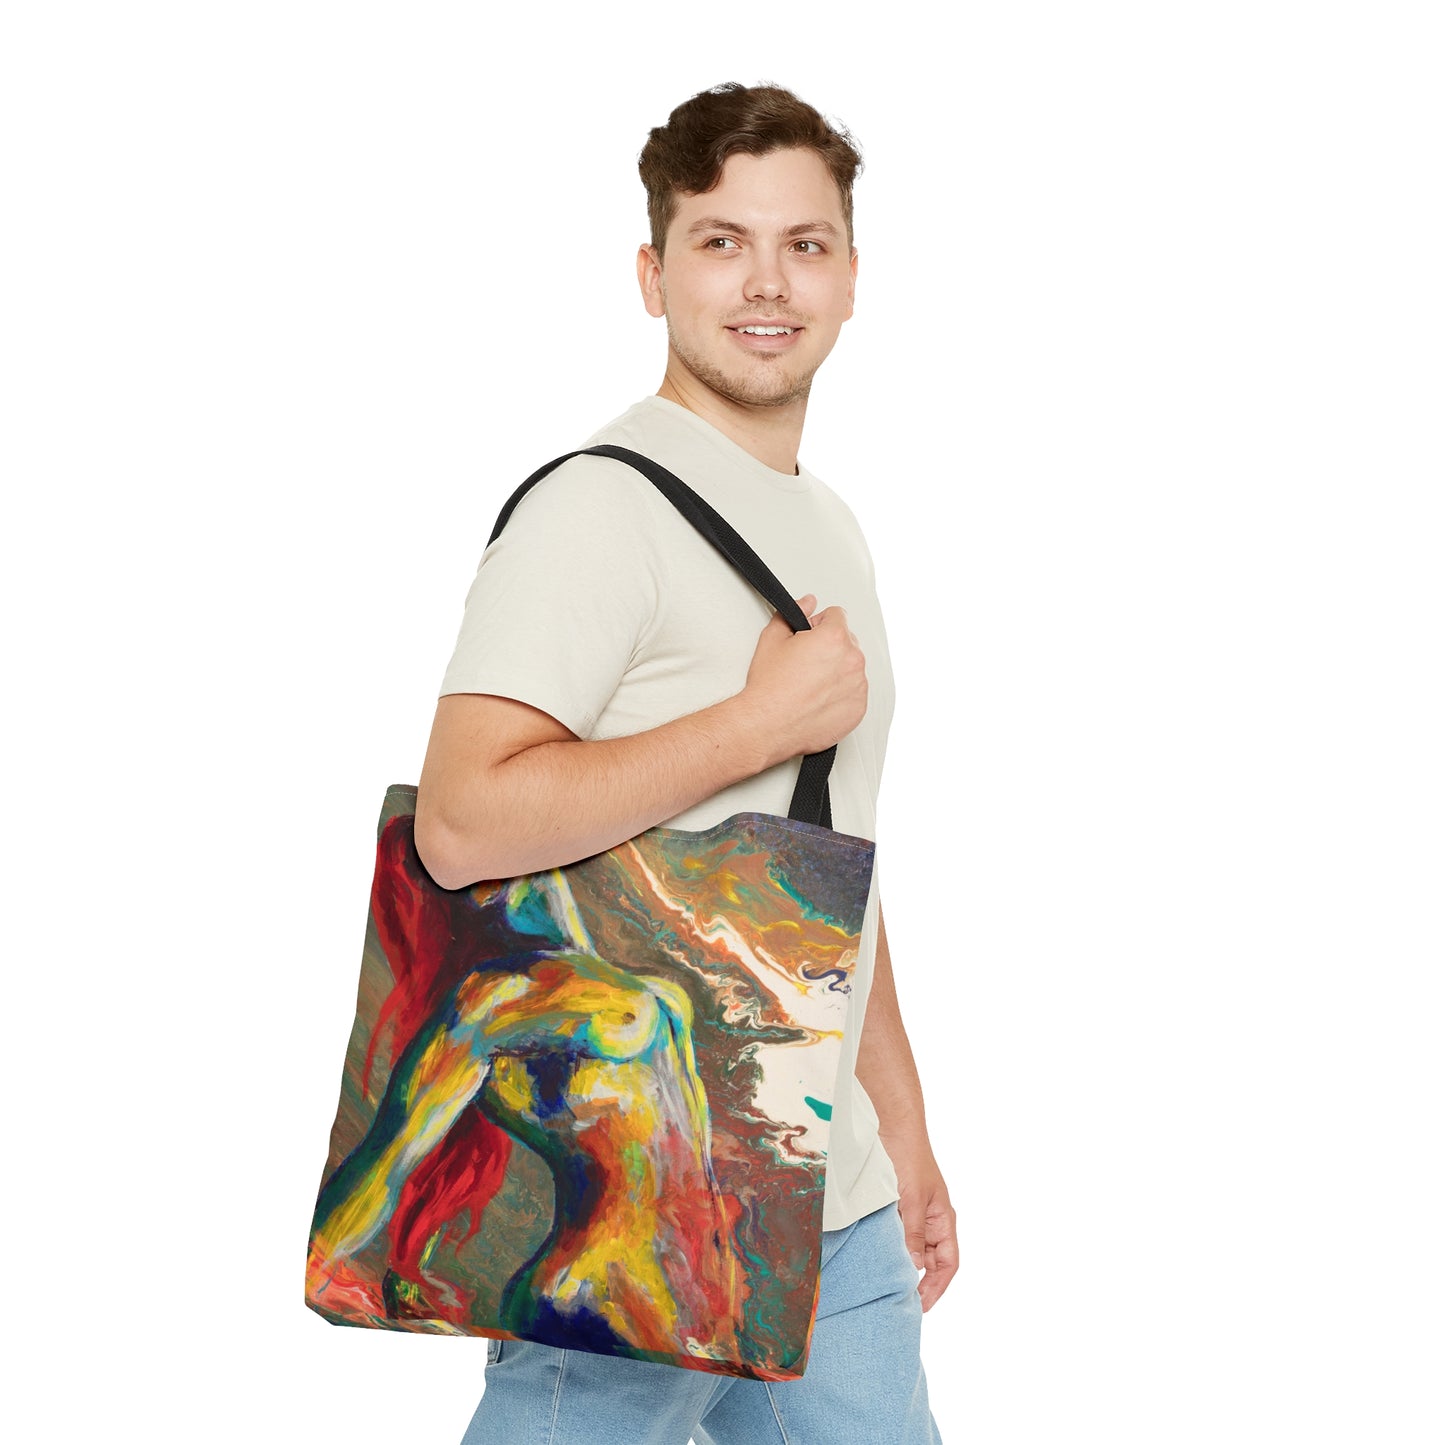 Inspiration Tote Bag, 18 x 17 in